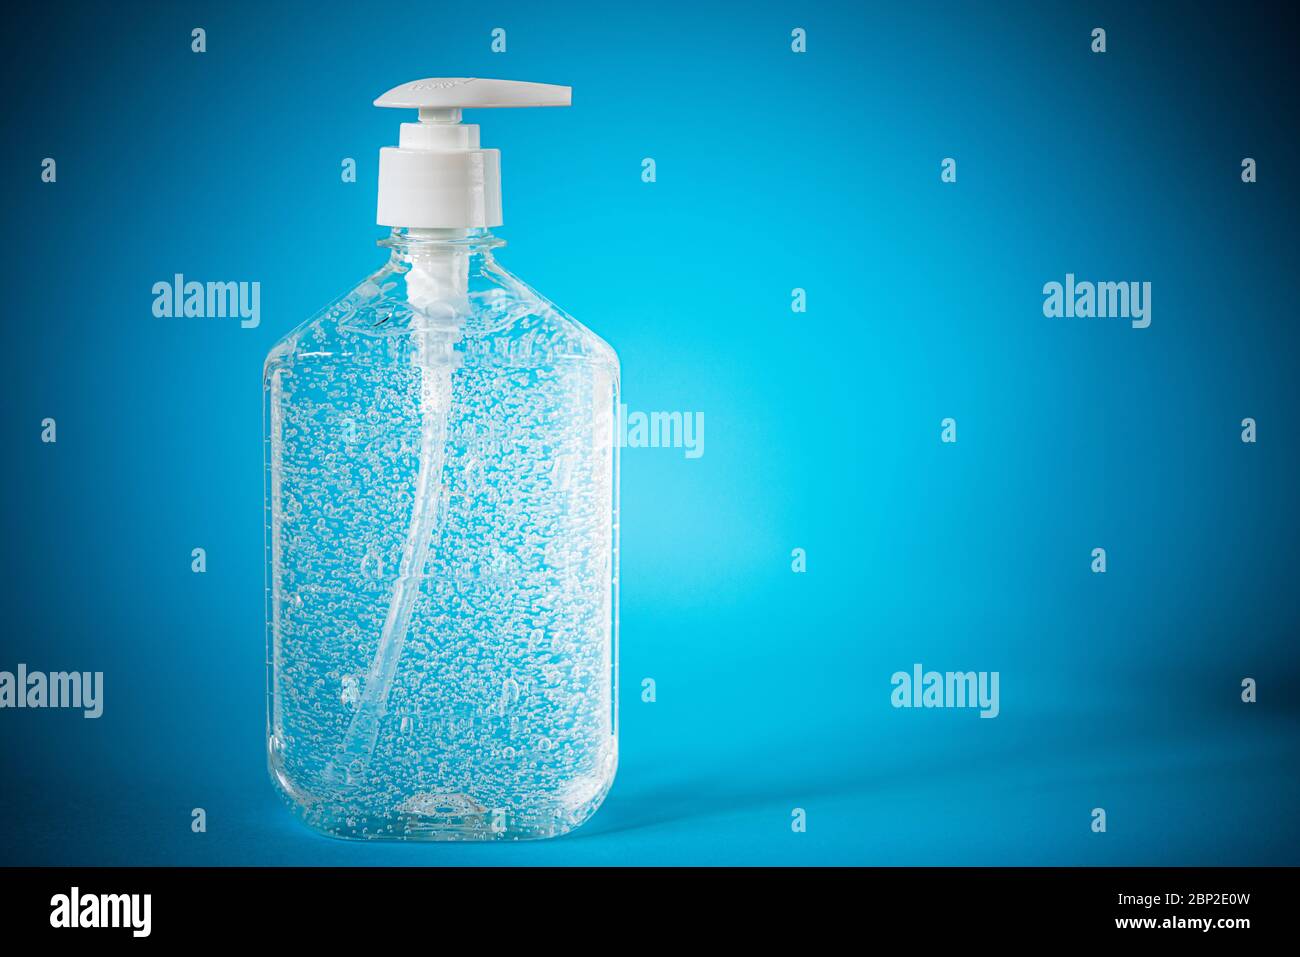 Alcohol-based disinfectant gel. Stock Photo